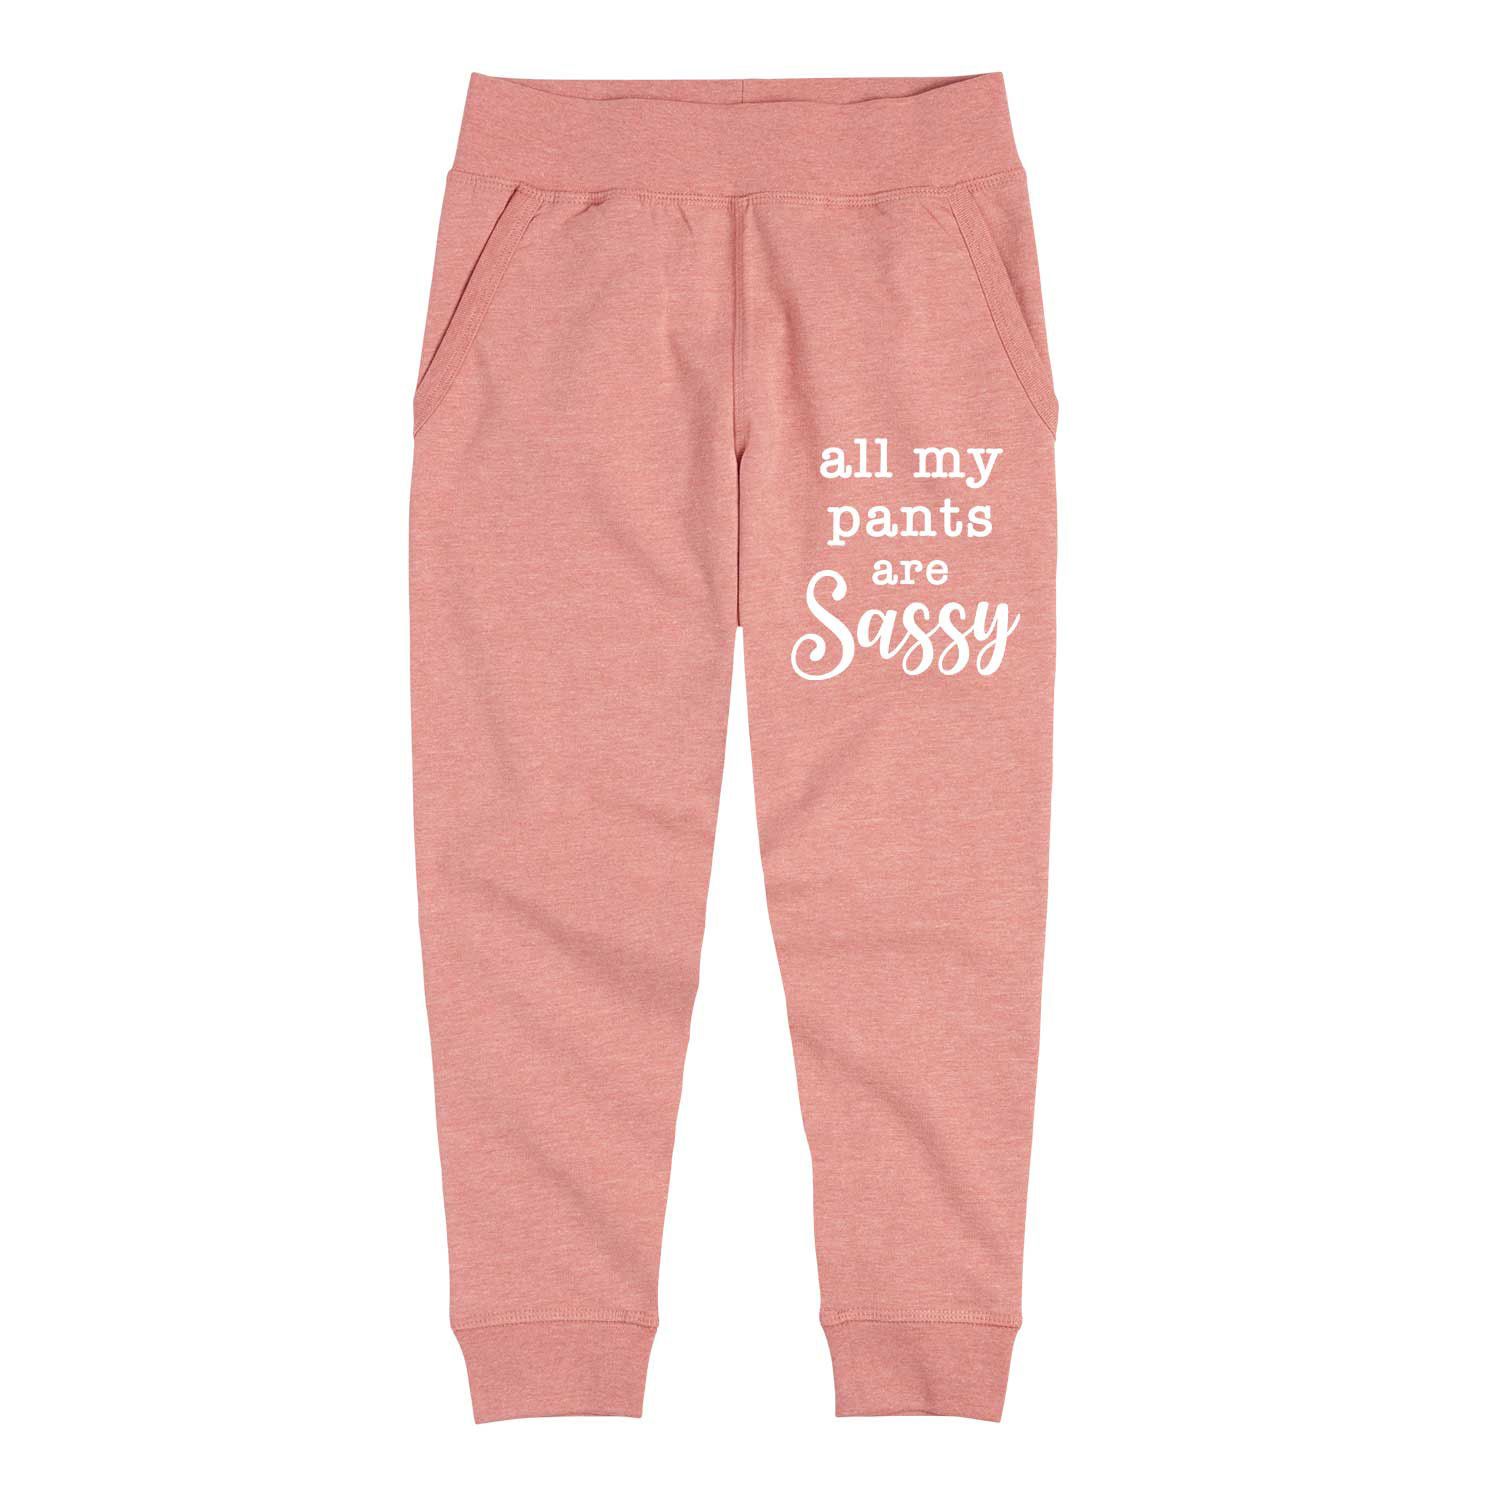 Girls 7-16 Can I Get A Snack Jogger Pants